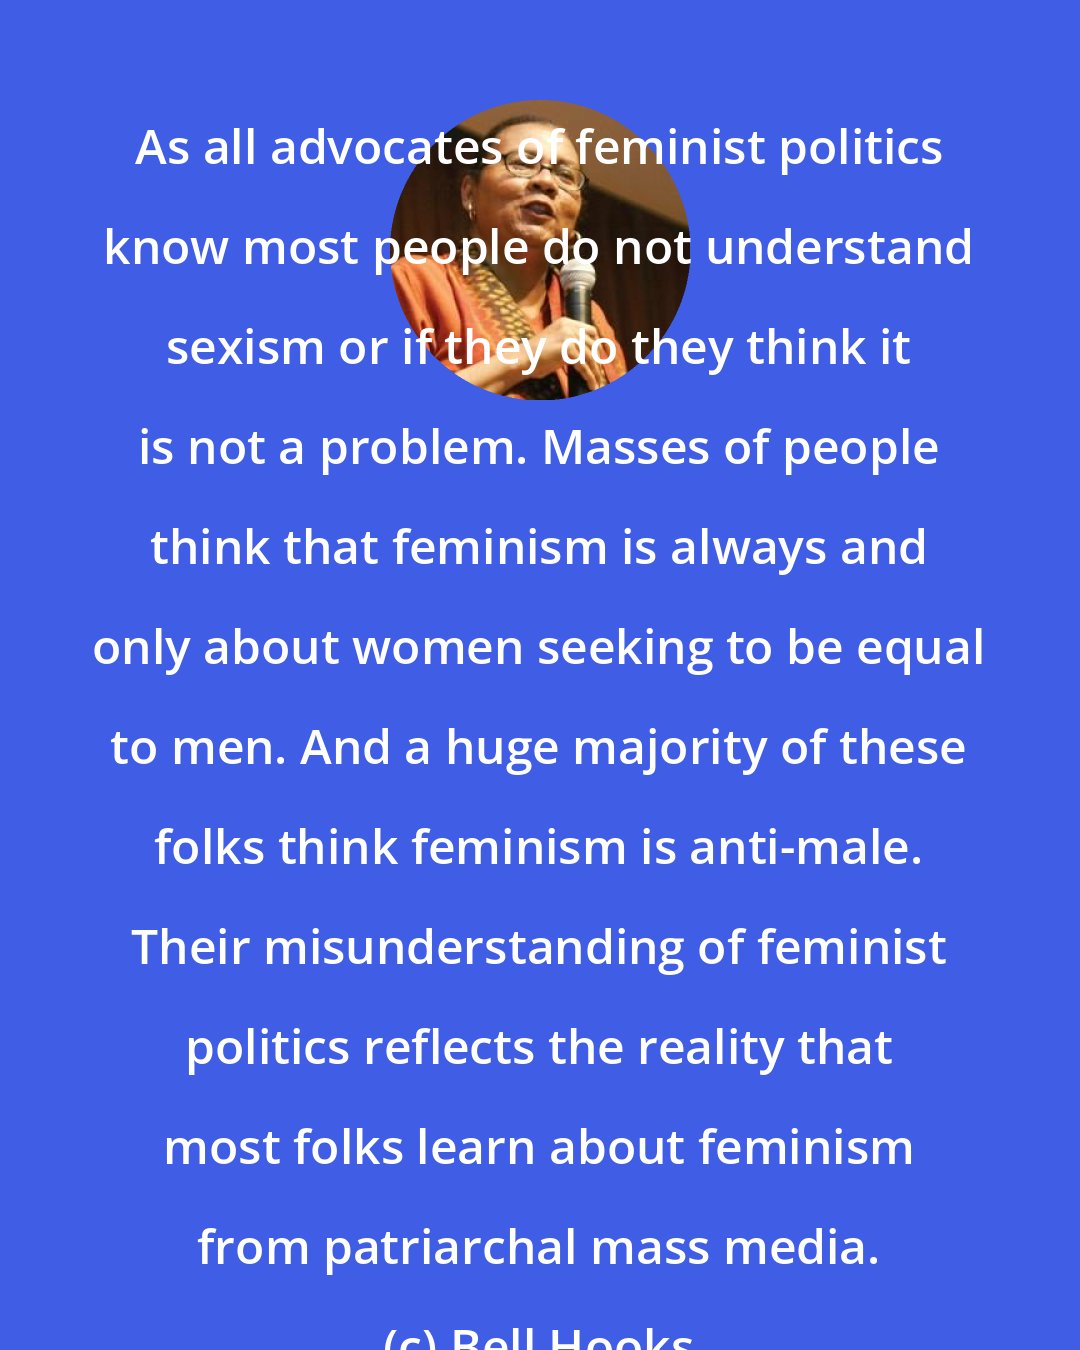 Bell Hooks: As all advocates of feminist politics know most people do not understand sexism or if they do they think it is not a problem. Masses of people think that feminism is always and only about women seeking to be equal to men. And a huge majority of these folks think feminism is anti-male. Their misunderstanding of feminist politics reflects the reality that most folks learn about feminism from patriarchal mass media.